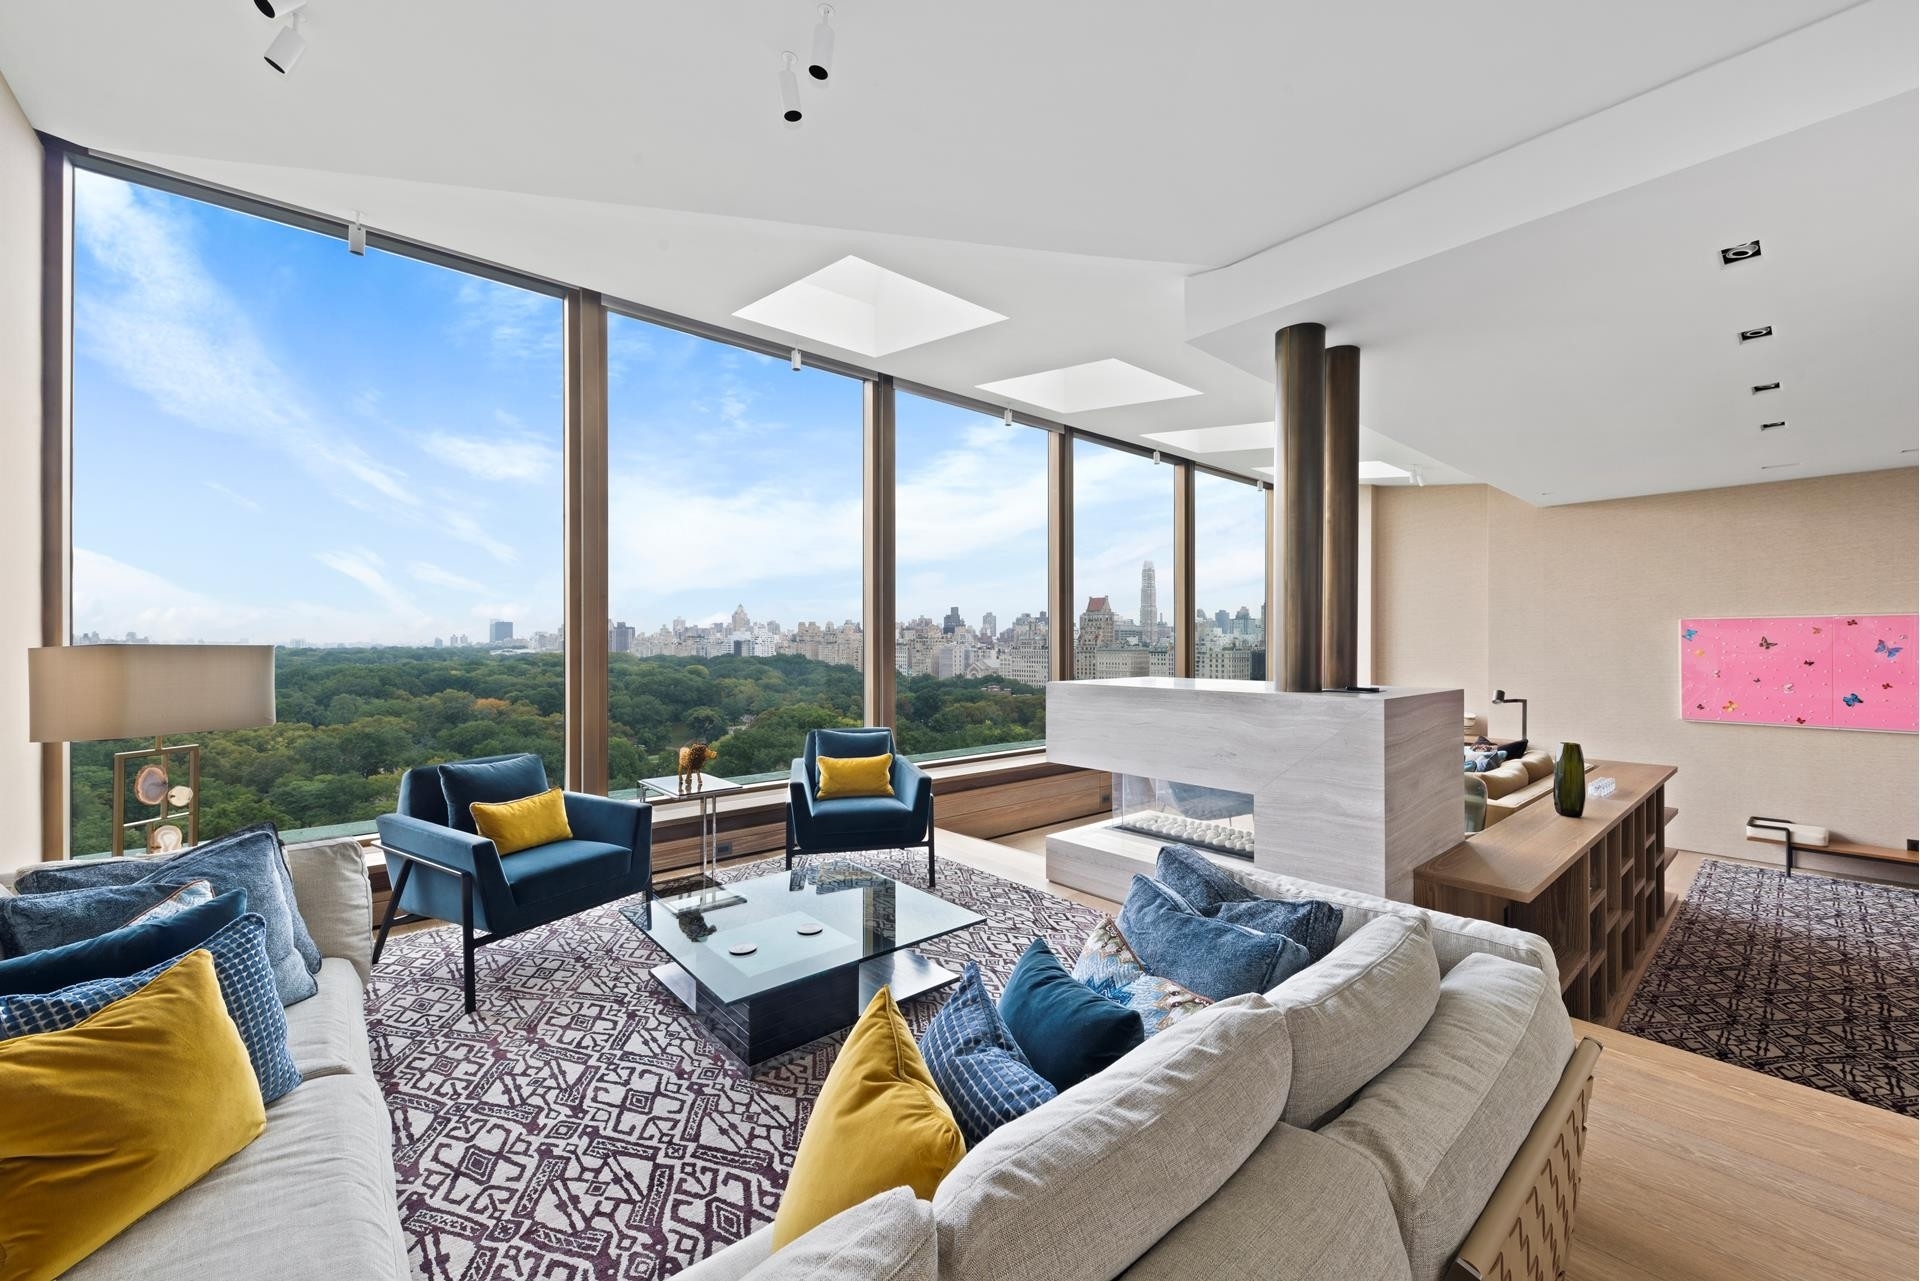 Co-op Properties for Sale at 128 CENTRAL PARK S, PH/15A Central Park South, New York, New York 10019